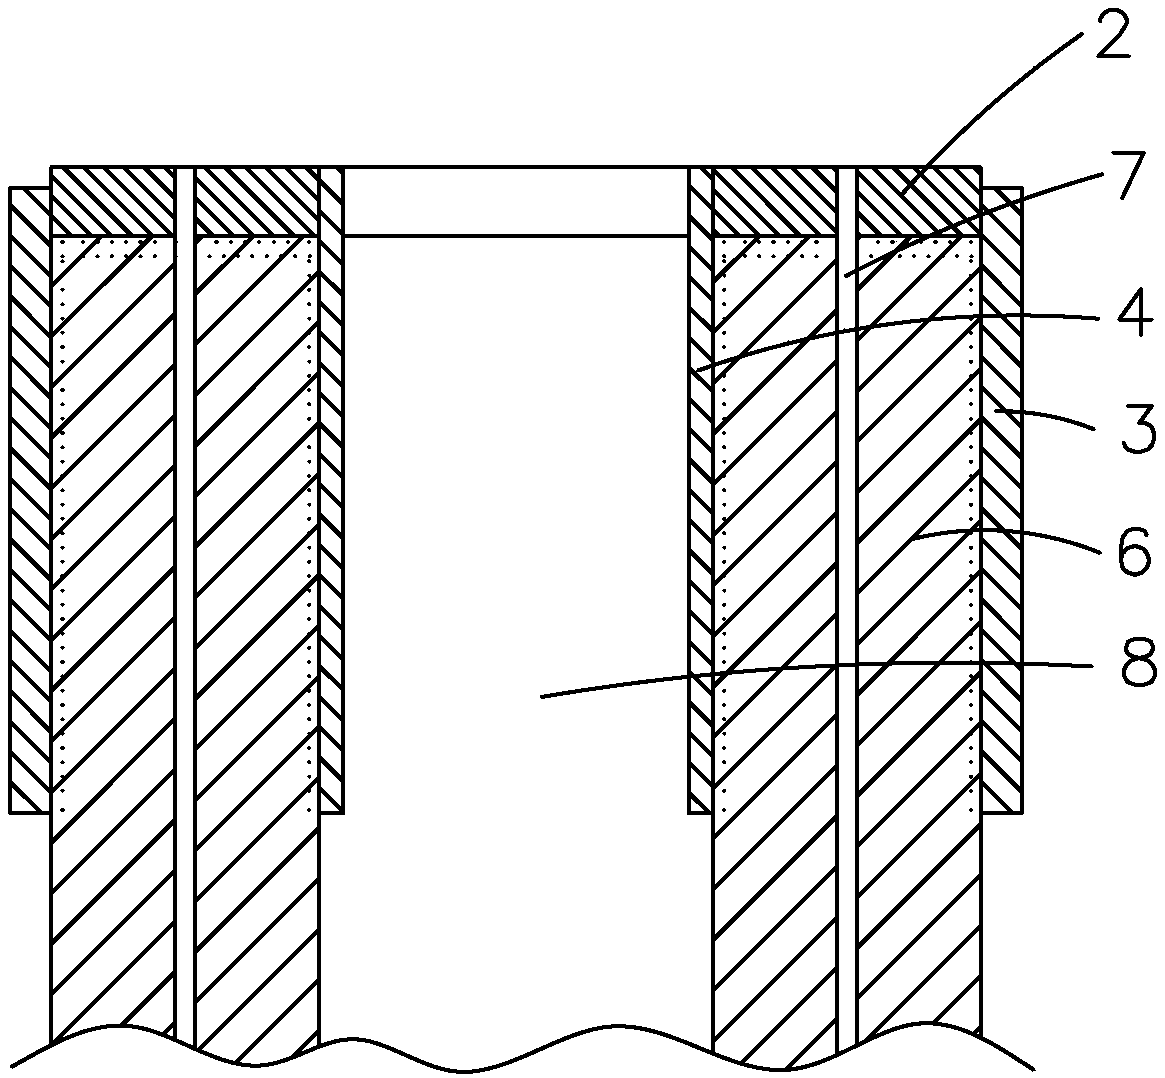 Pile cap and method for repairing and reinforcing concrete tubular-pile pile head